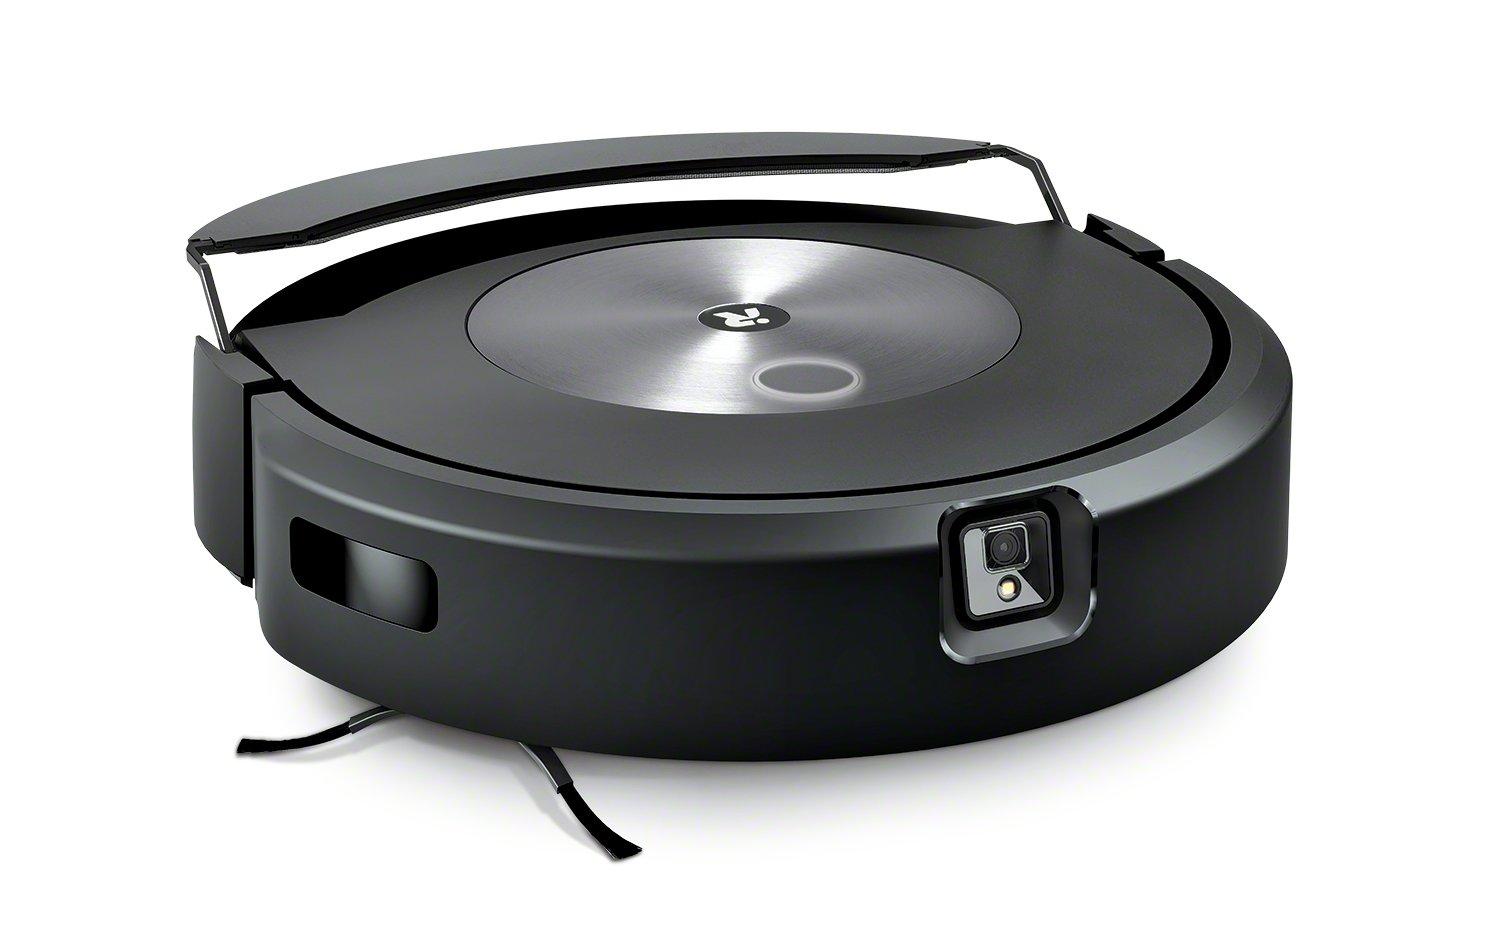 Pre-order the new Roomba that both vacuums and mops